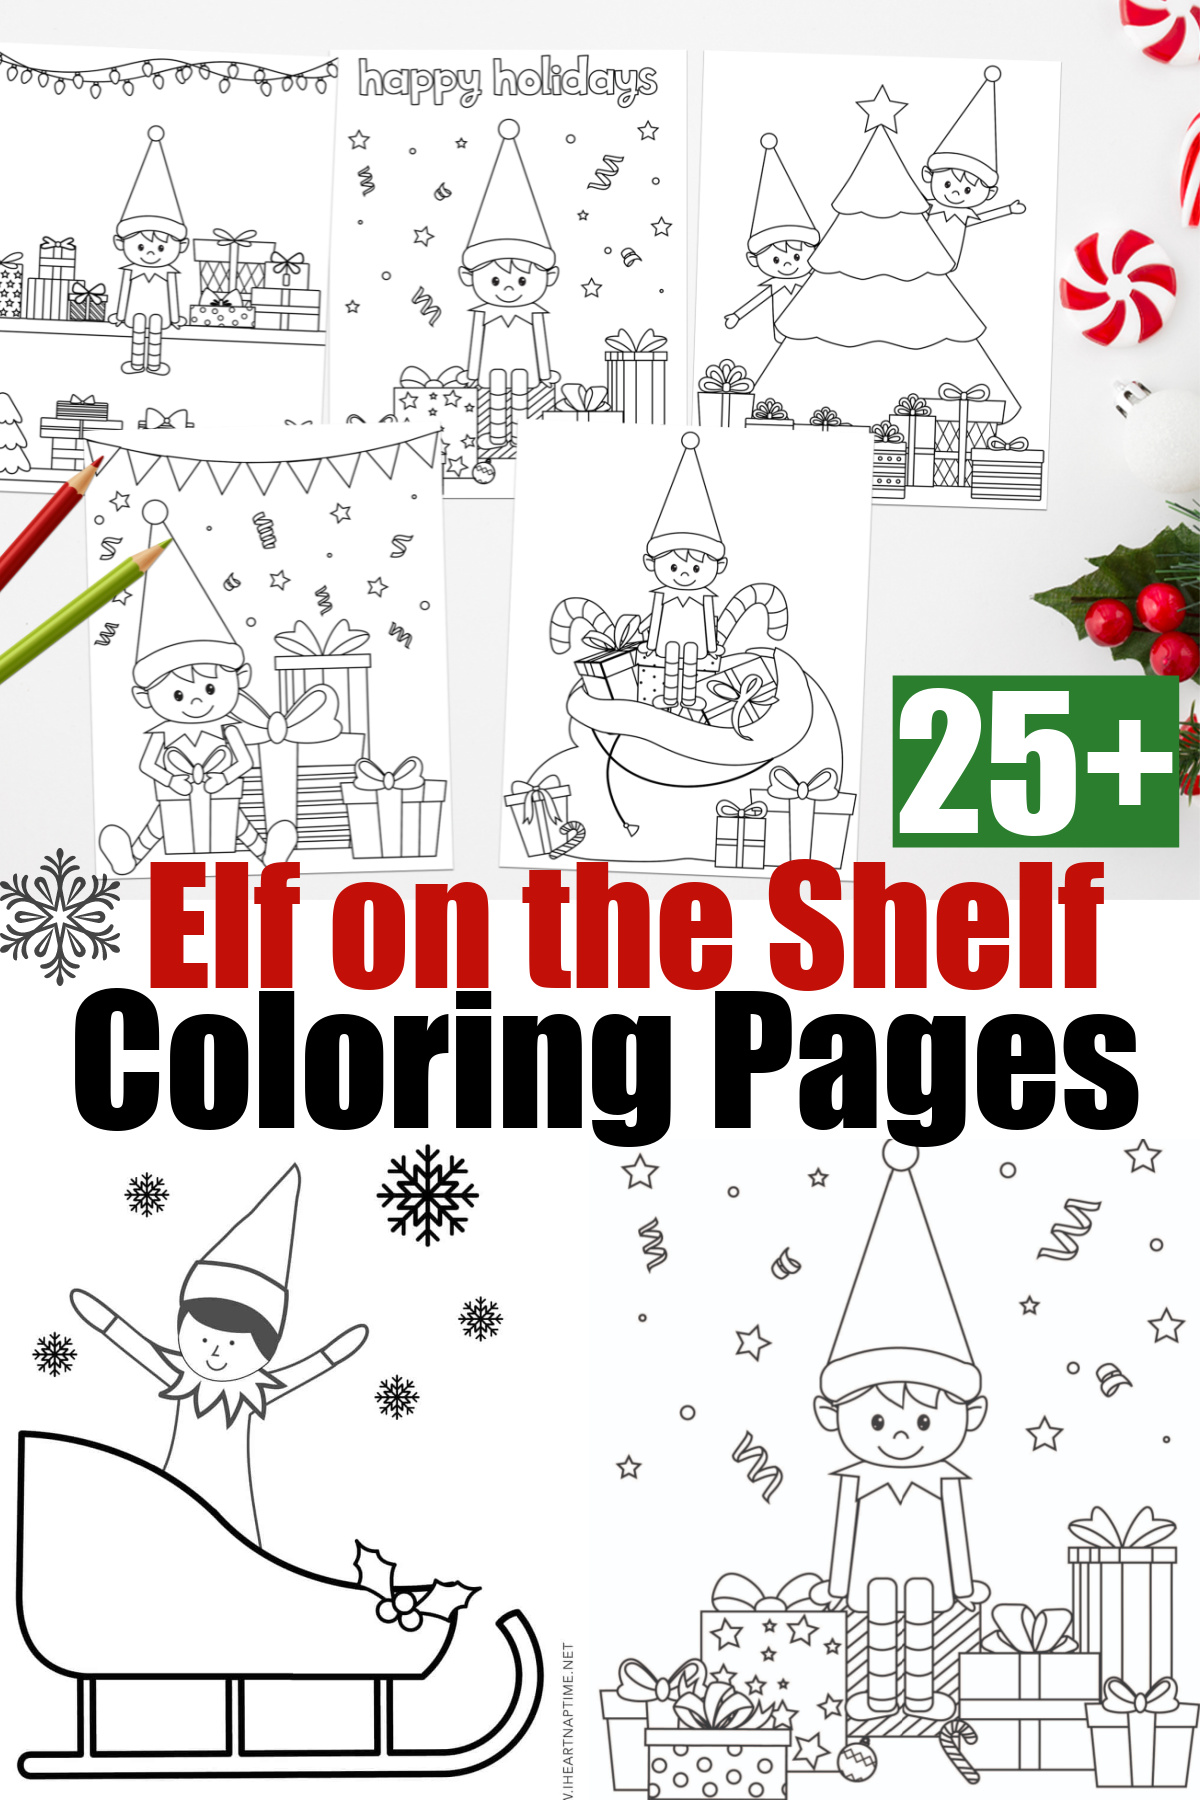 elf on the shelf coloring pages to print and color